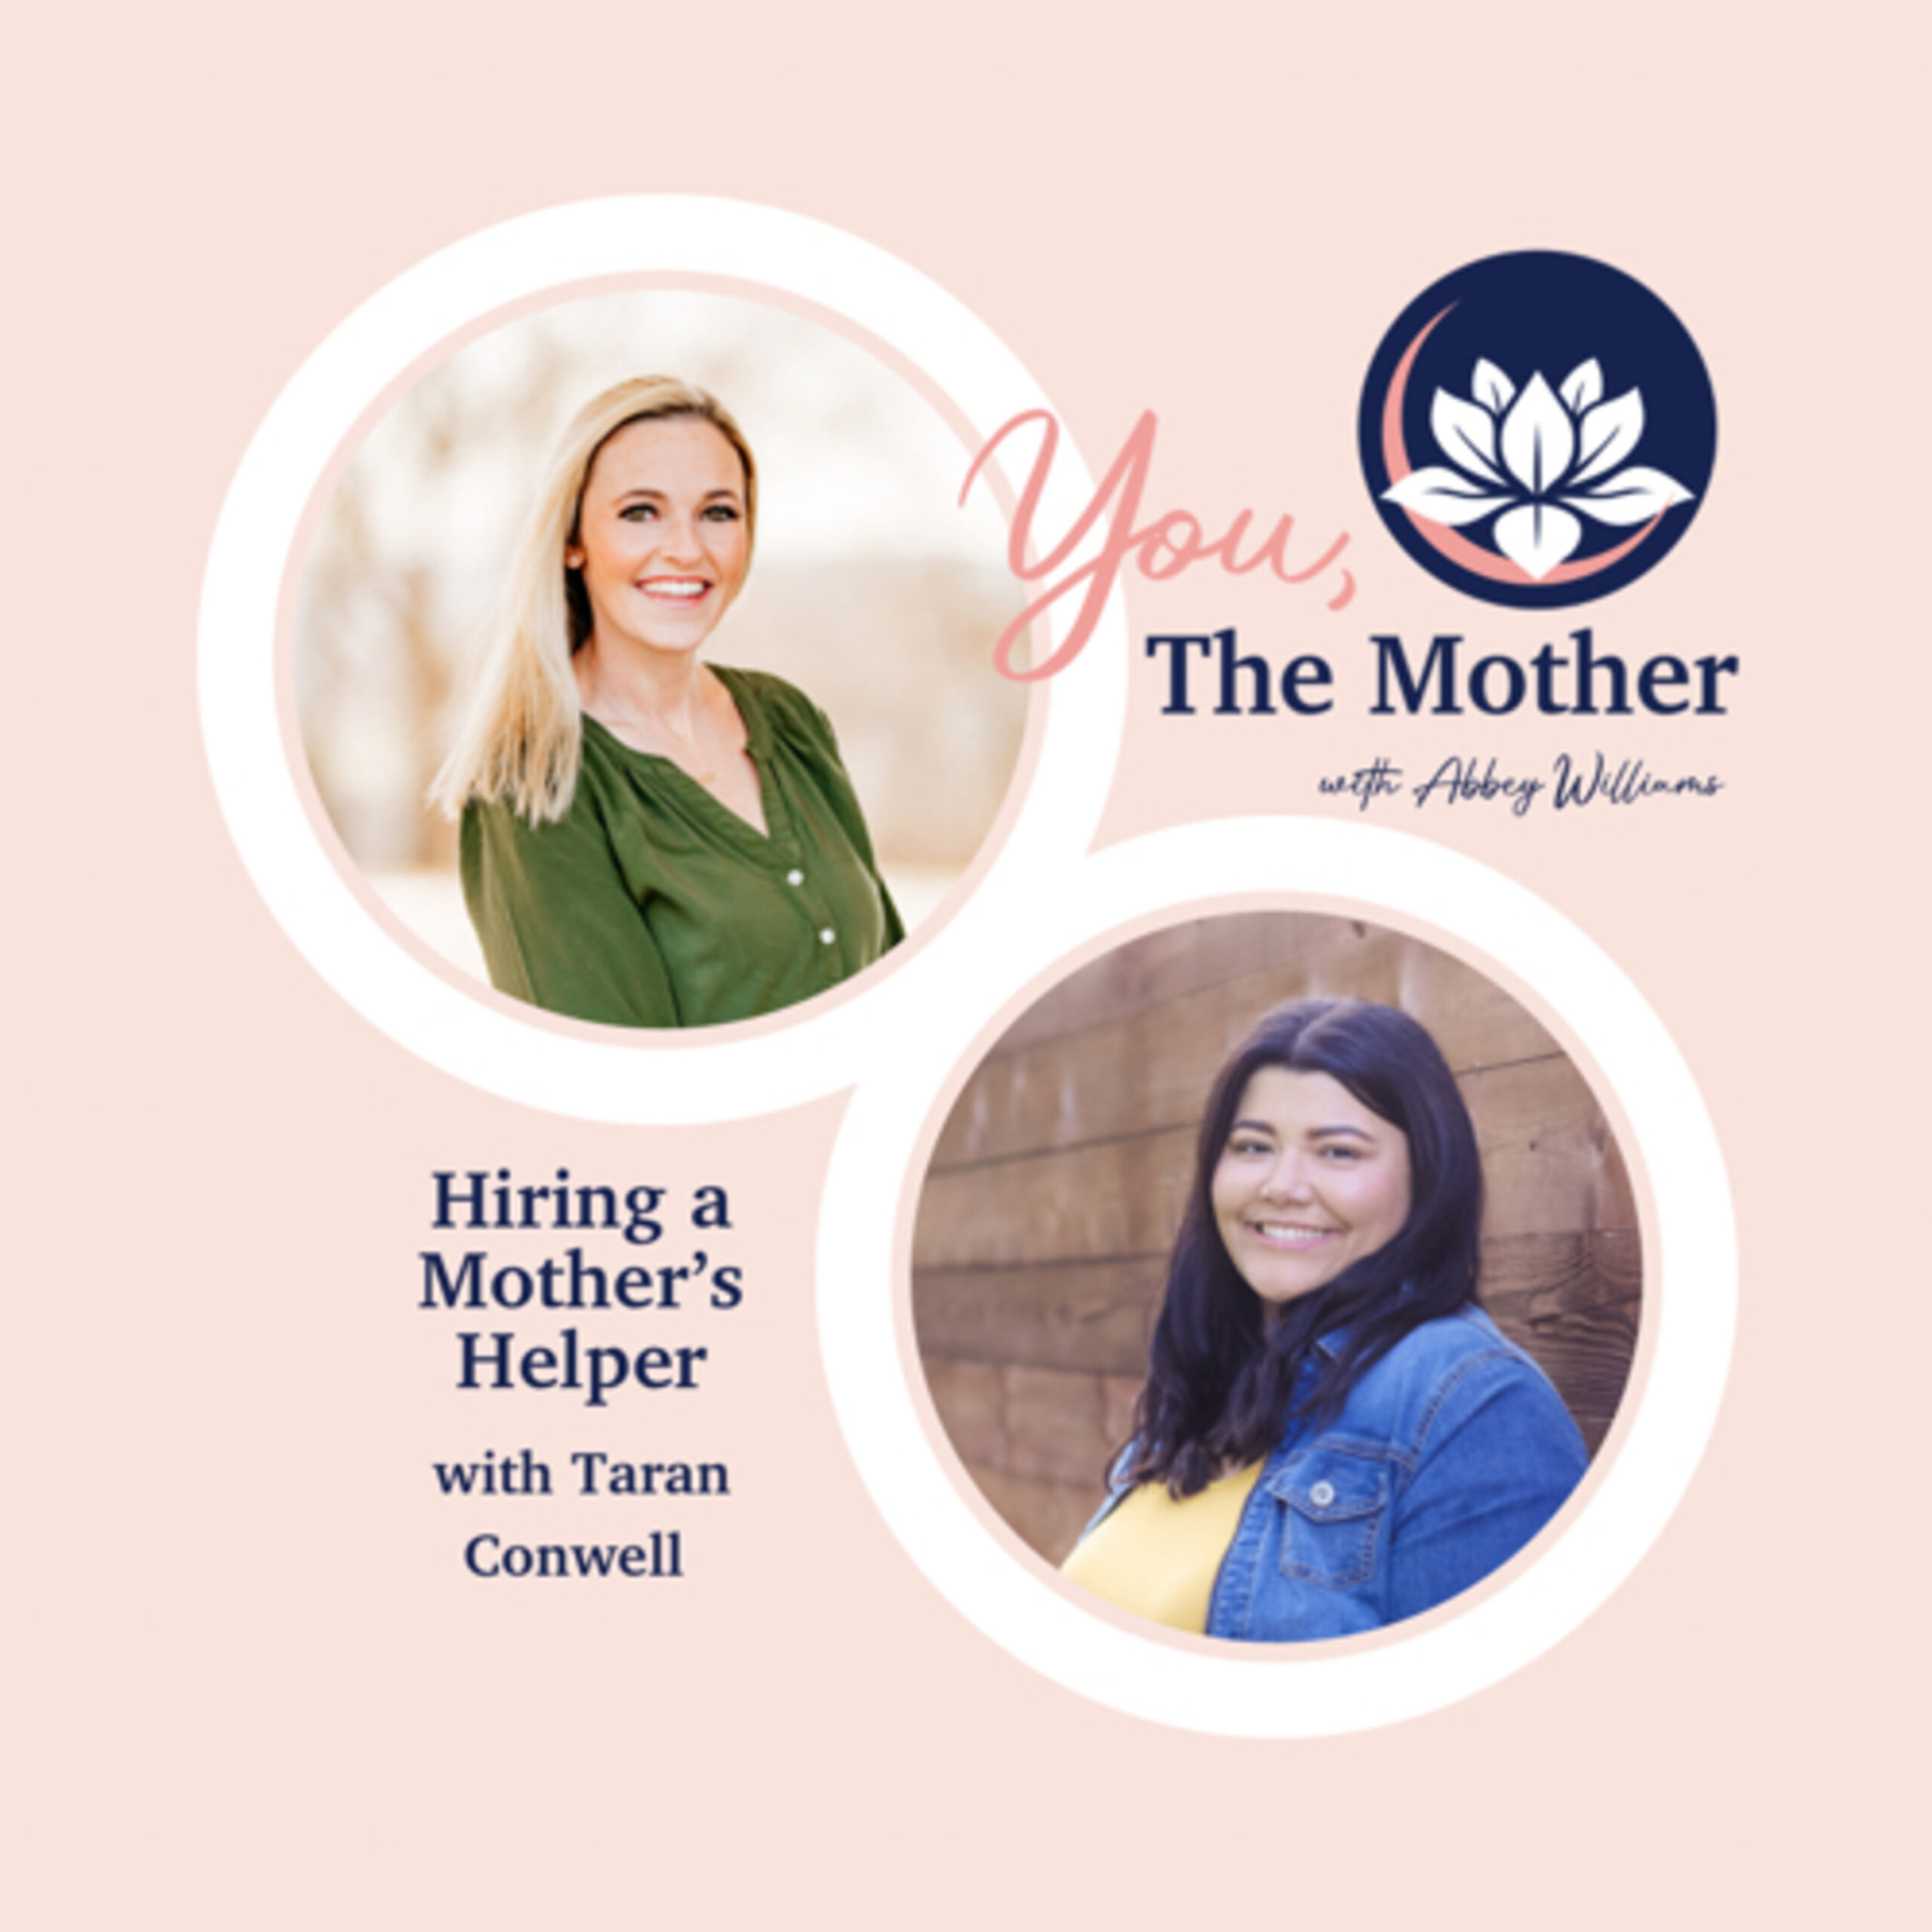 Hiring a Mother’s Helper with Taran Conwell